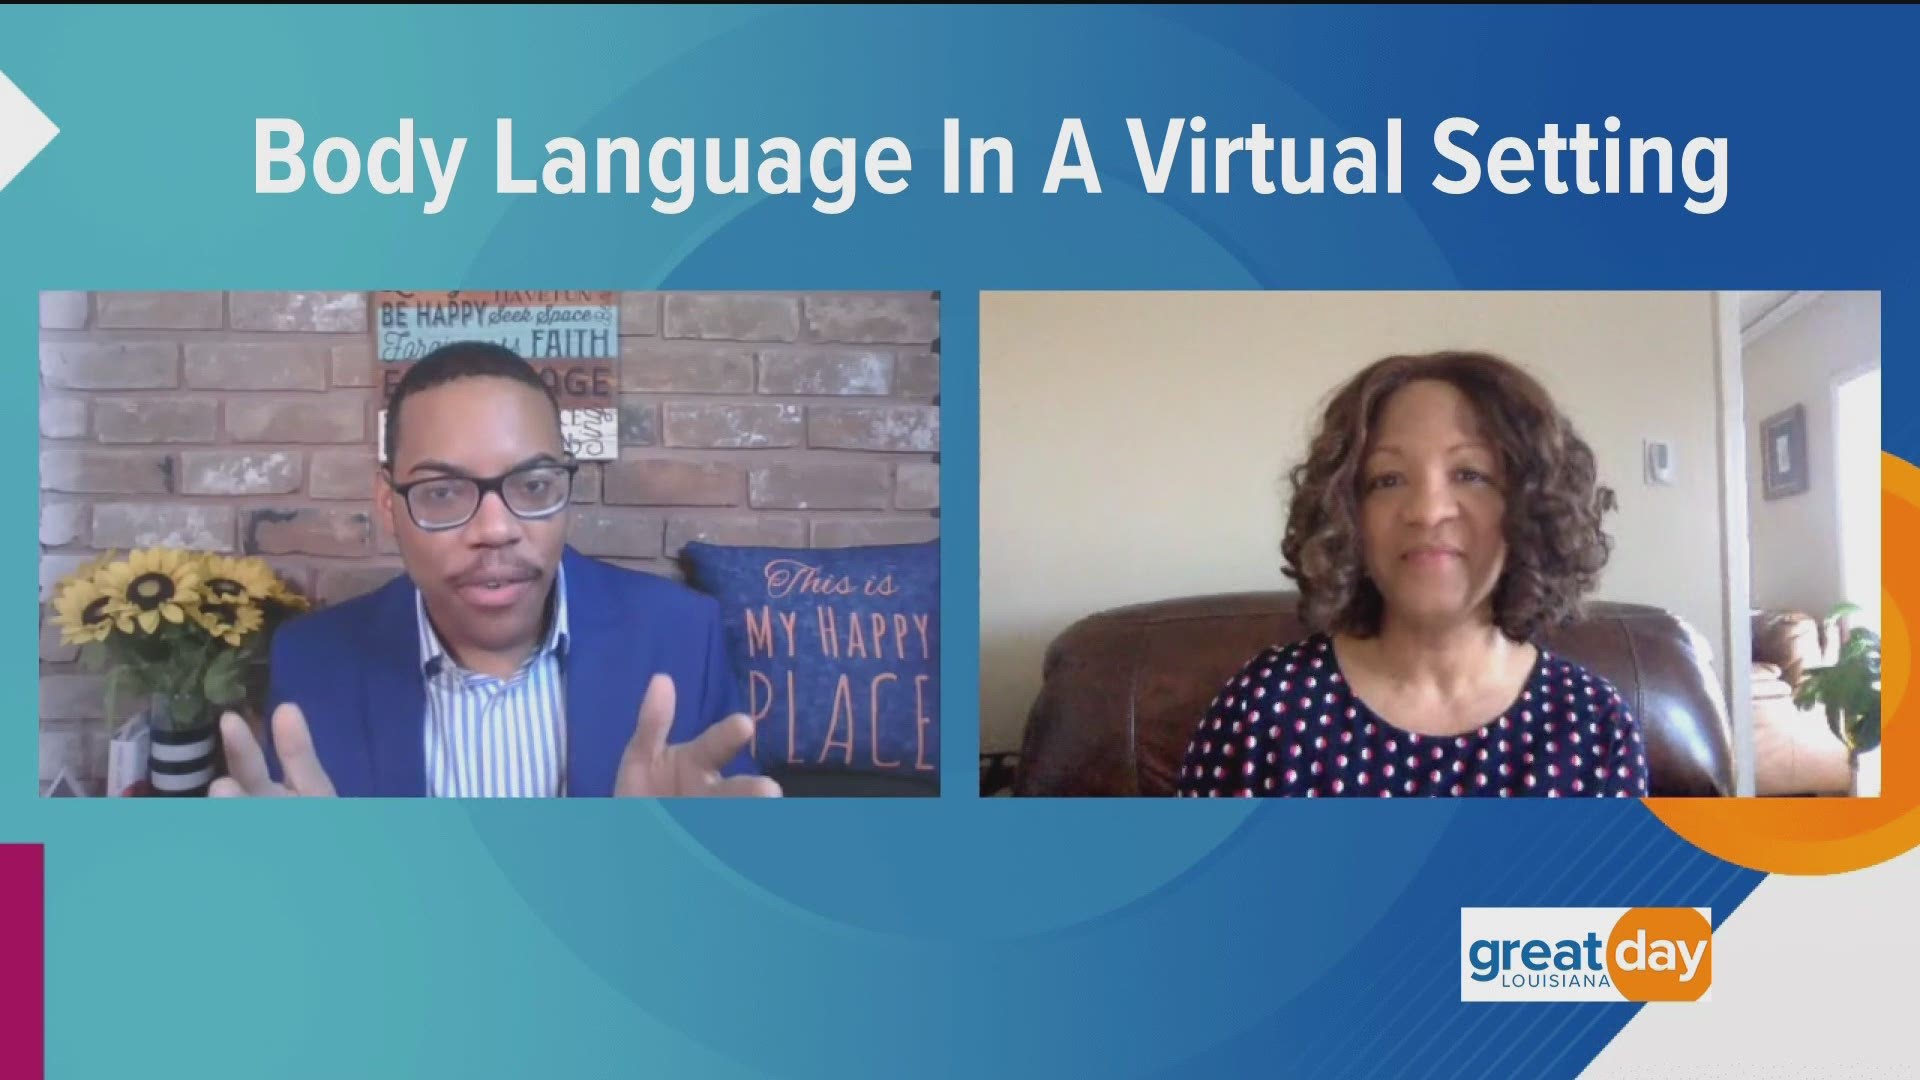 A career adviser with the Tulane School of Professional Advancement discussed body language tips during virtual meetings.